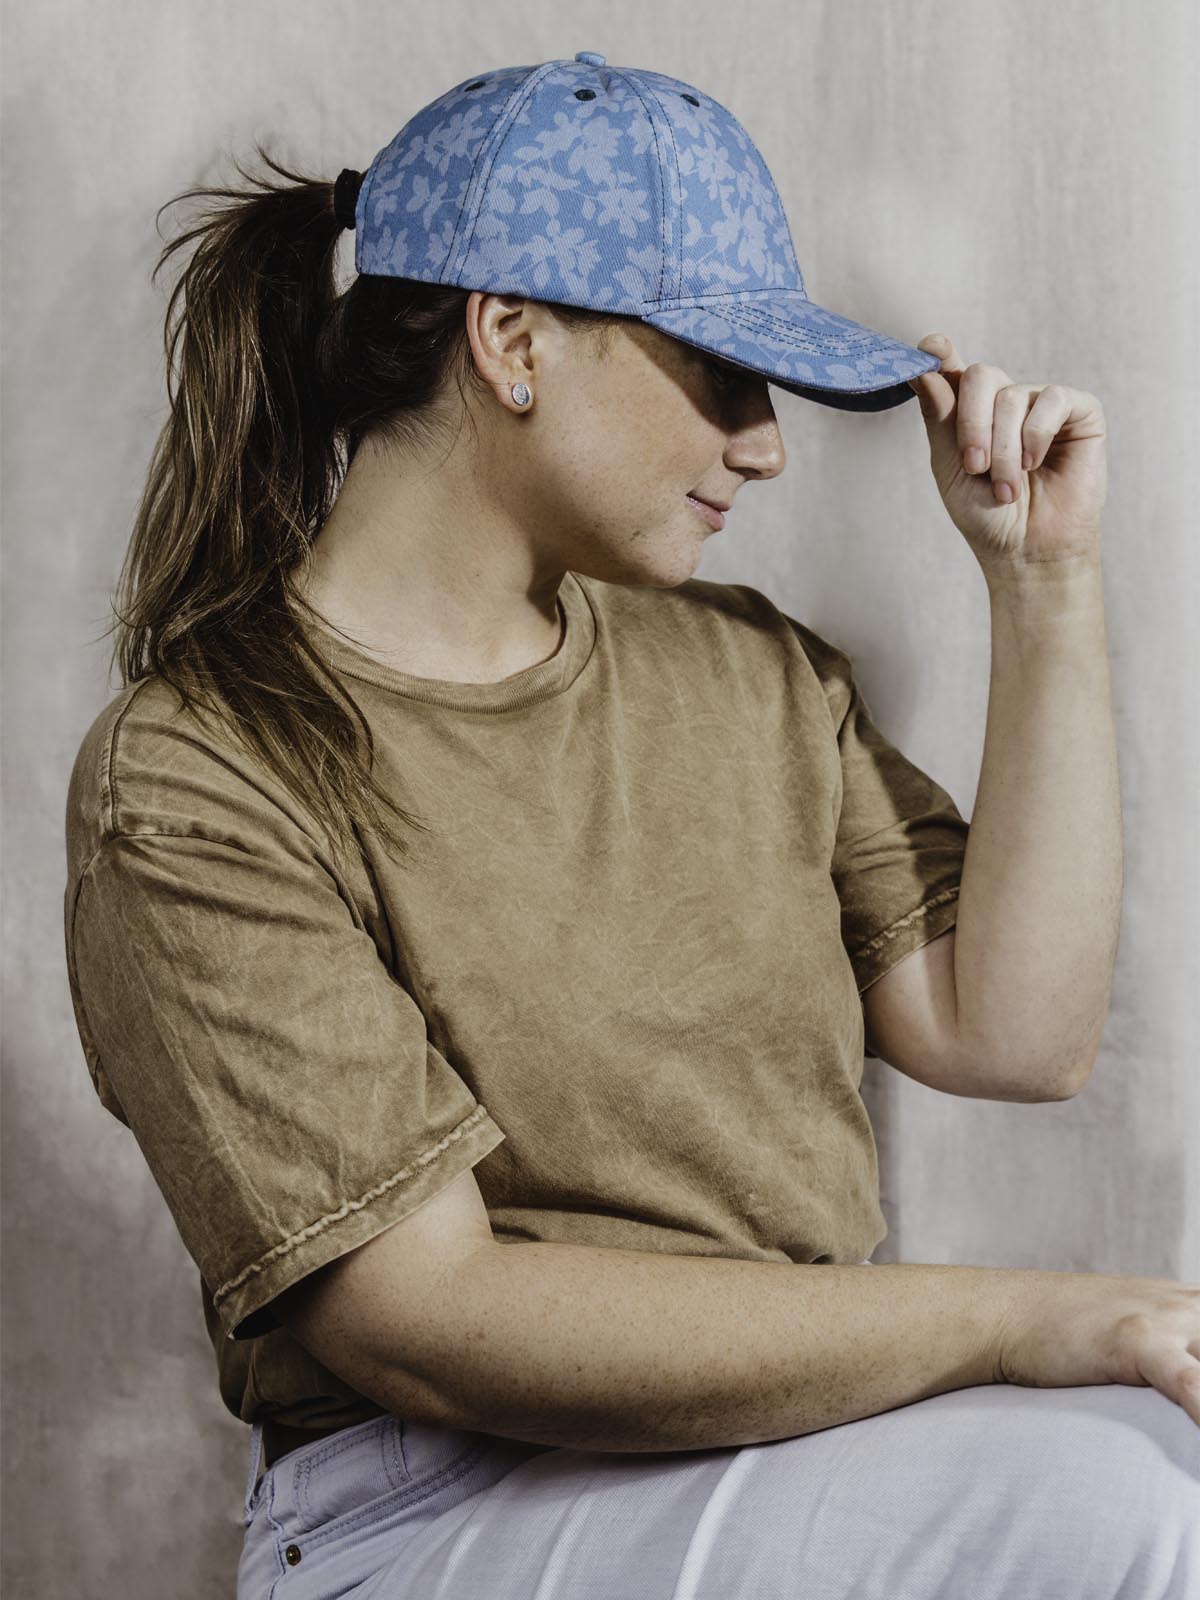 Teal floral hat on girl wearing brown tshirt and blue jeans in front of tan background. 